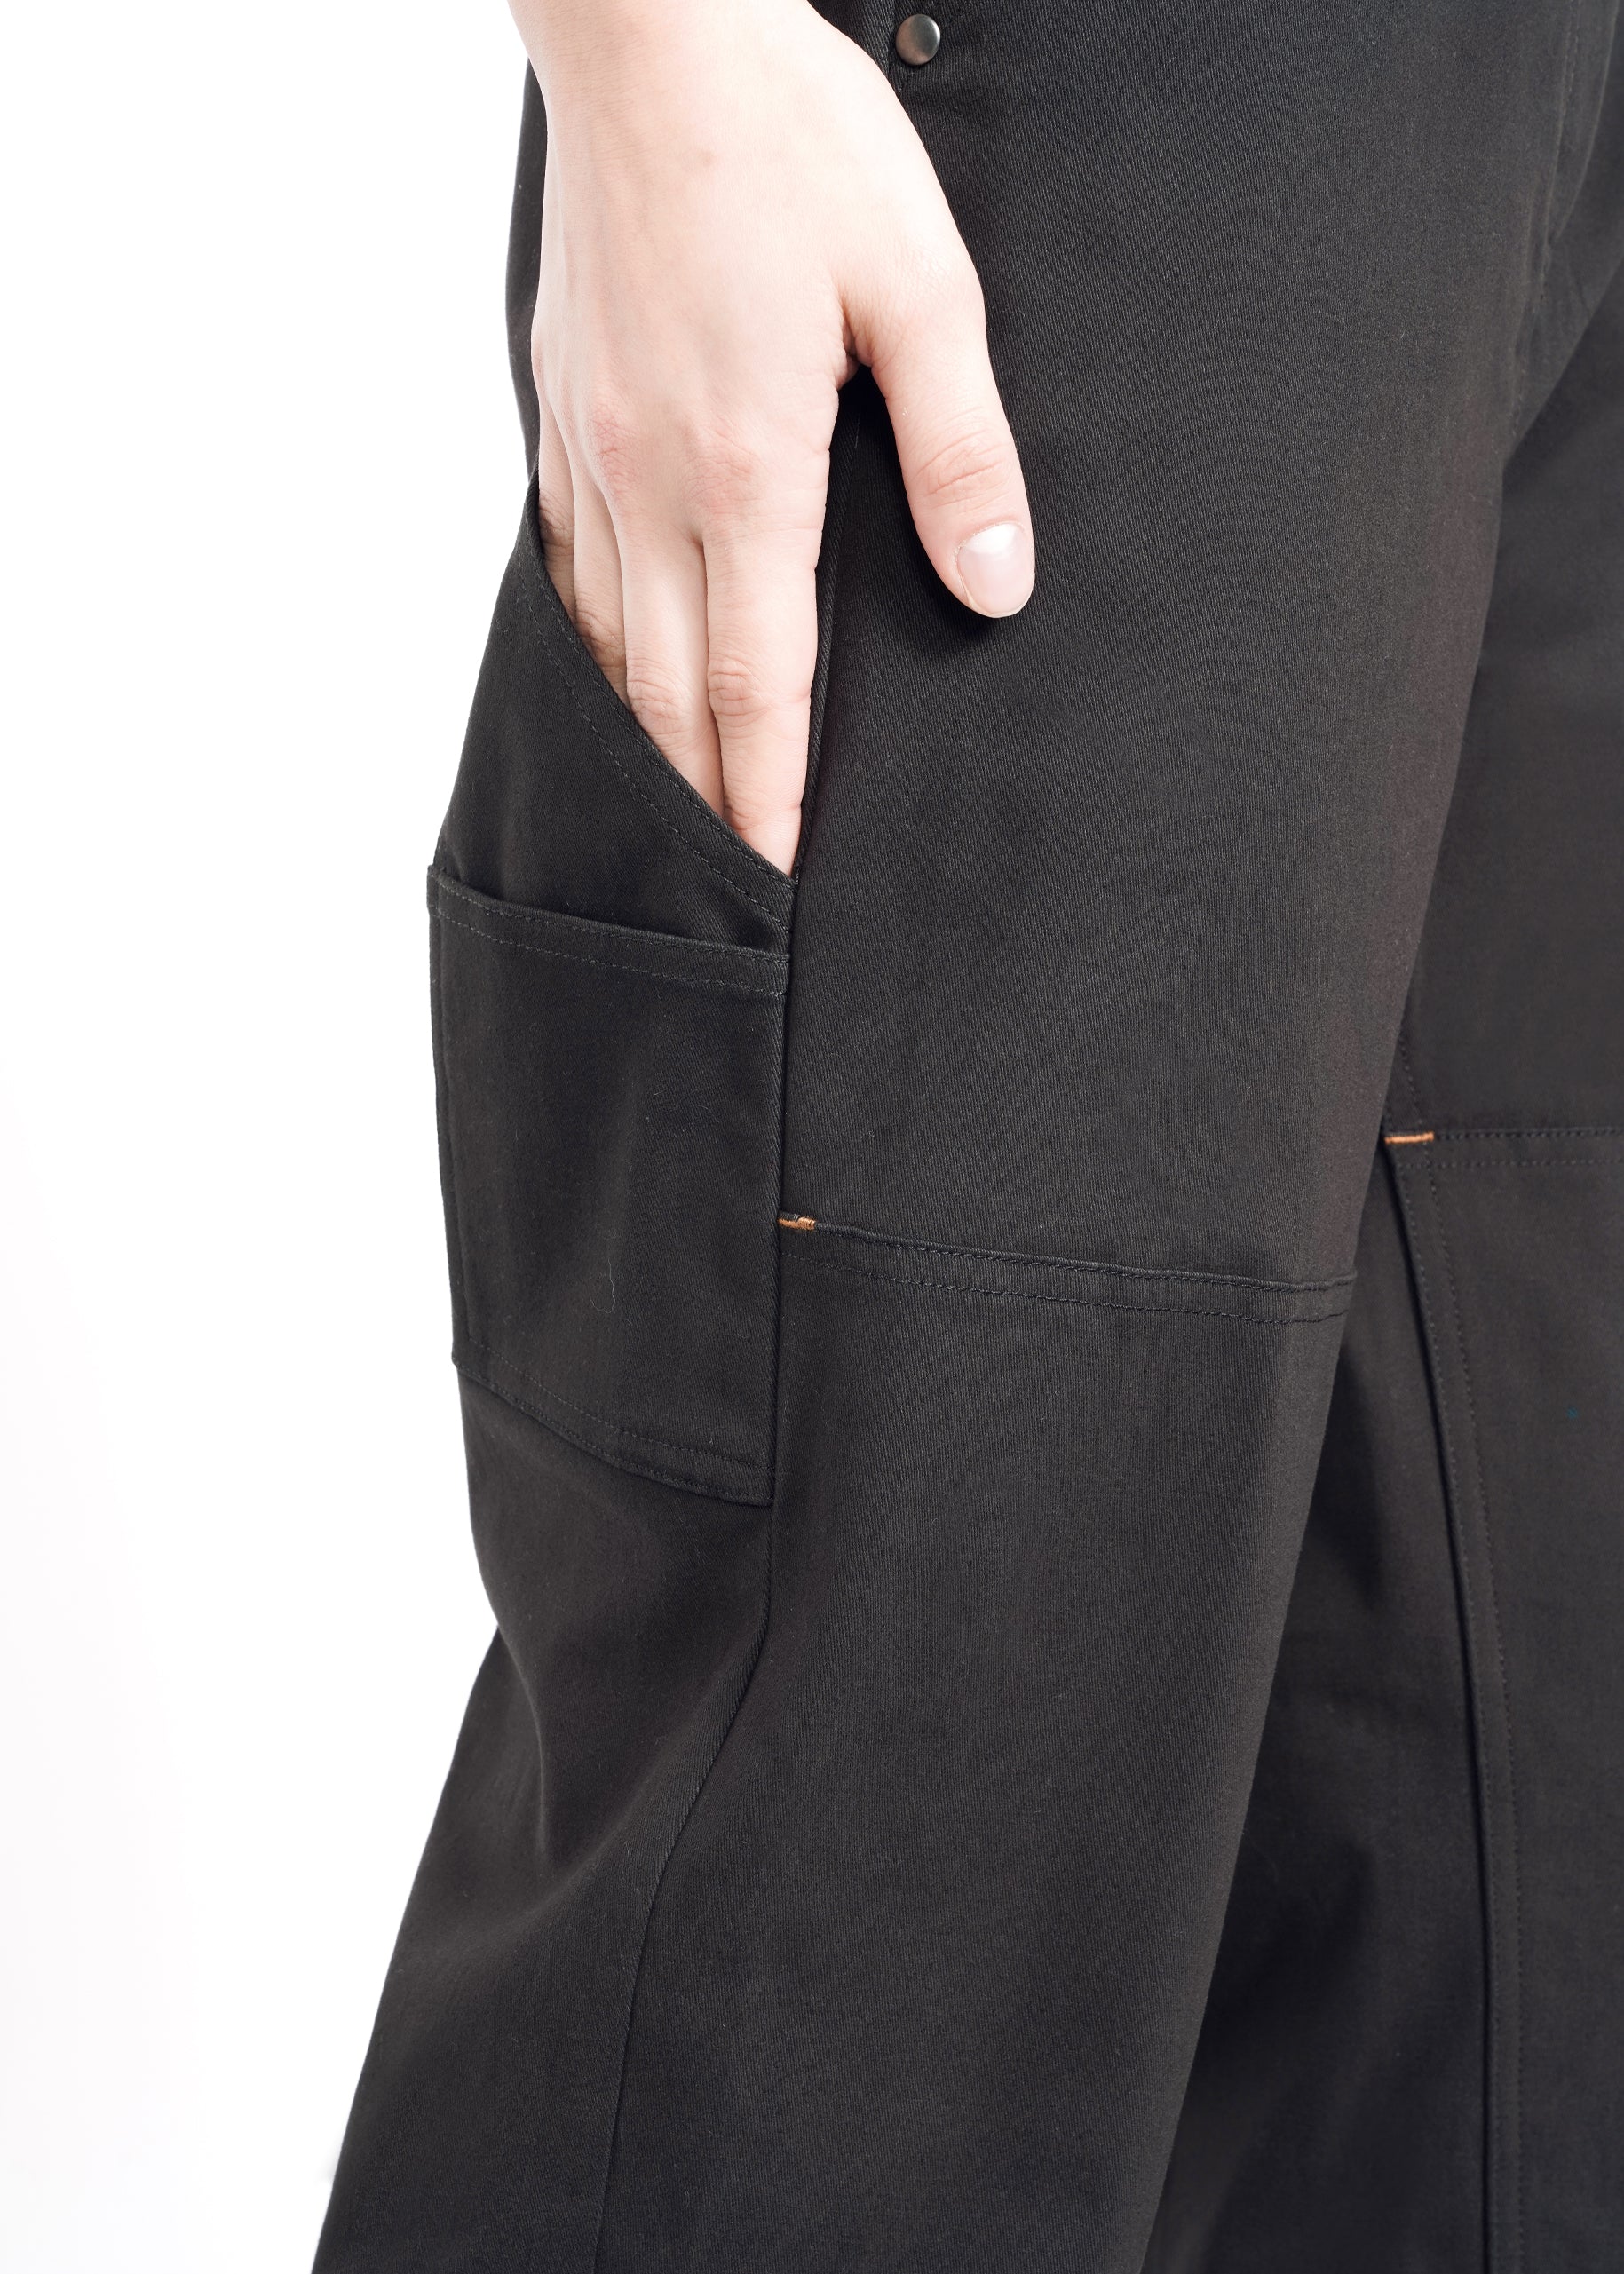 The Essential Work Pant in Black